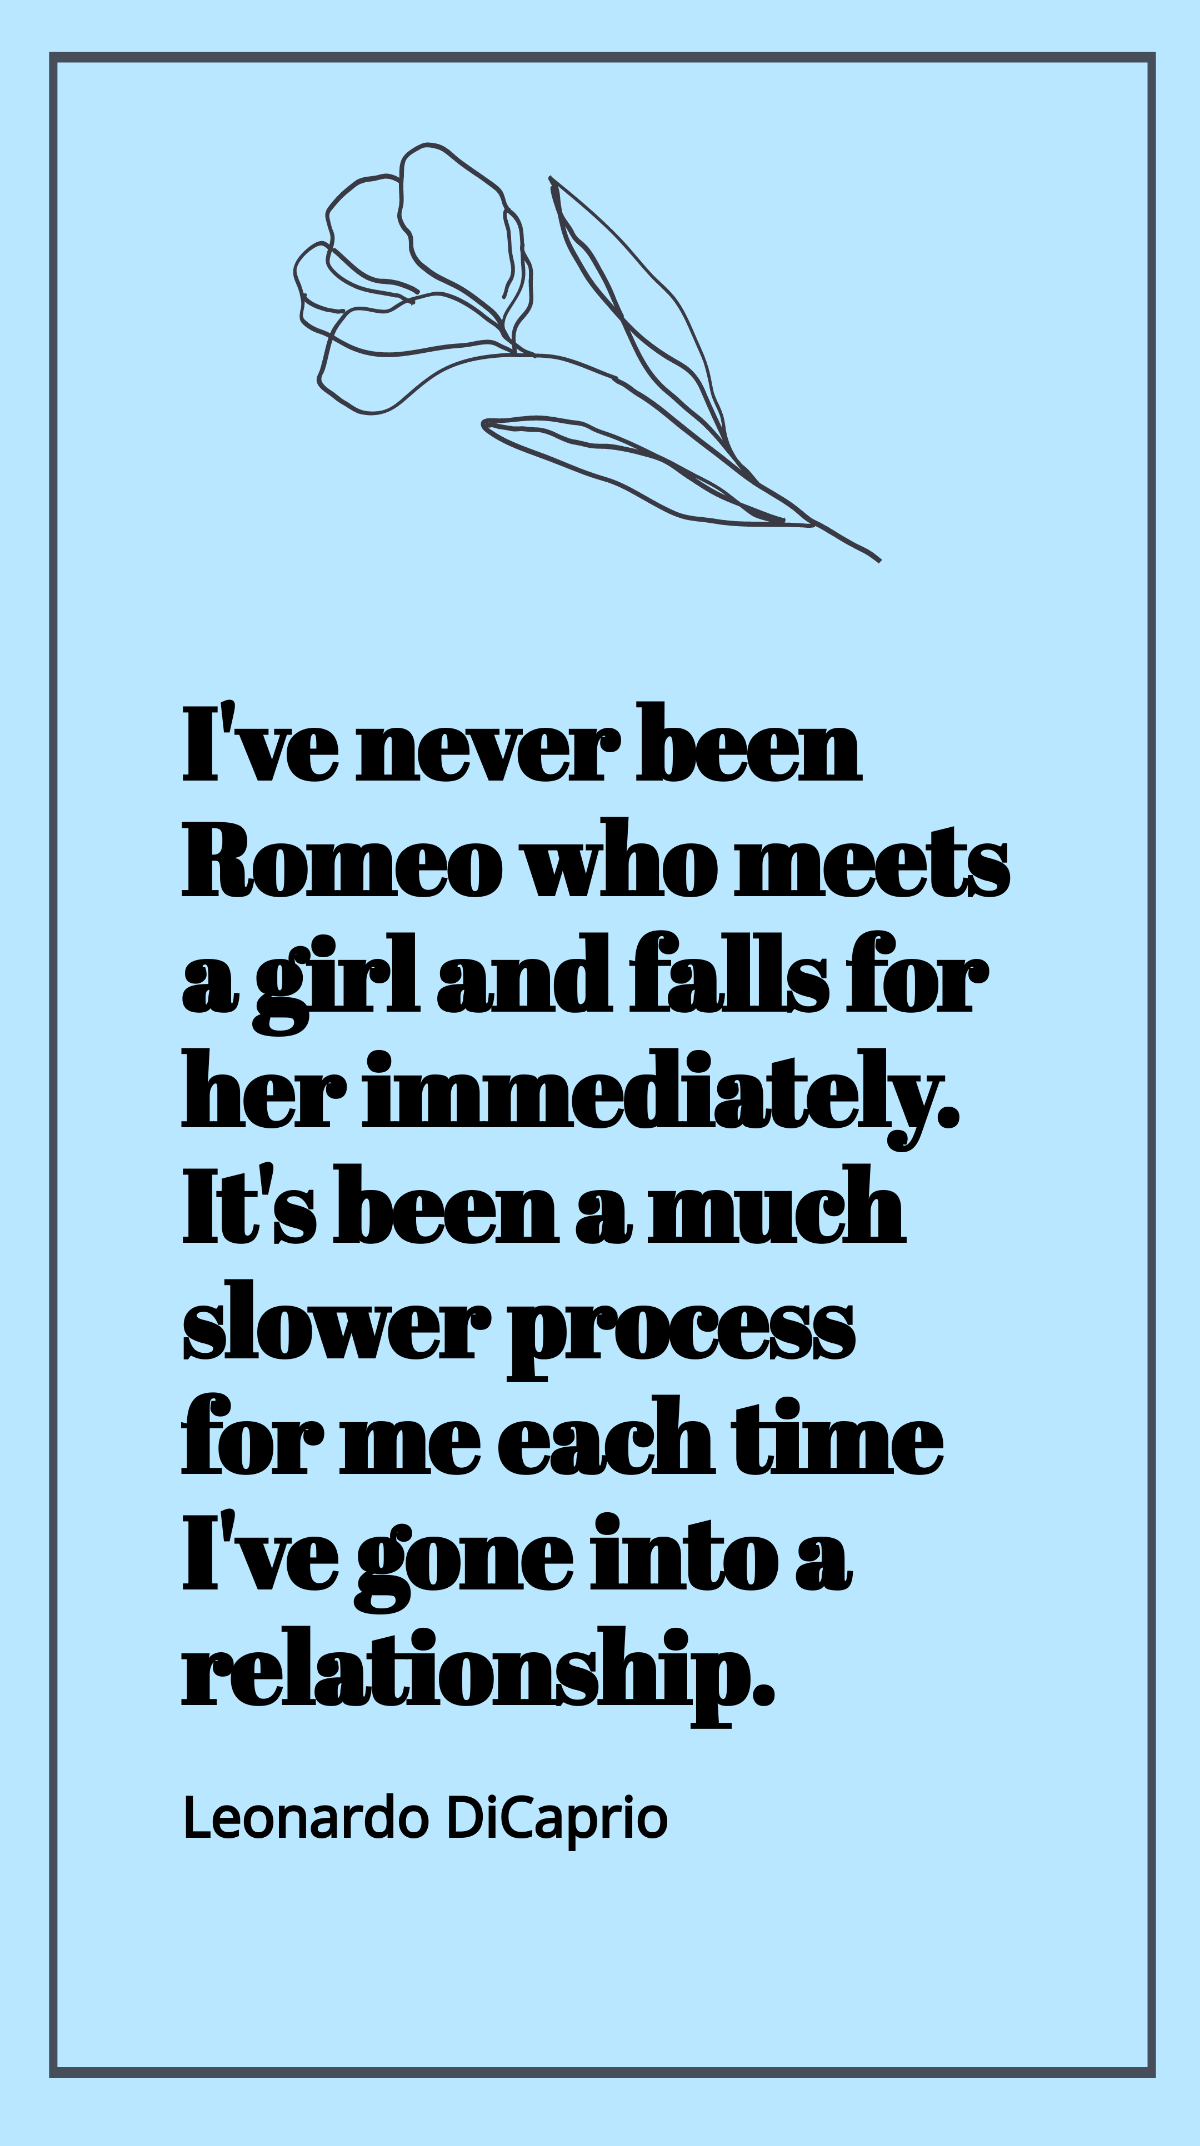 Leonardo DiCaprio - I've never been Romeo who meets a girl and falls for her immediately. It's been a much slower process for me each time I've gone into a relationship. Template